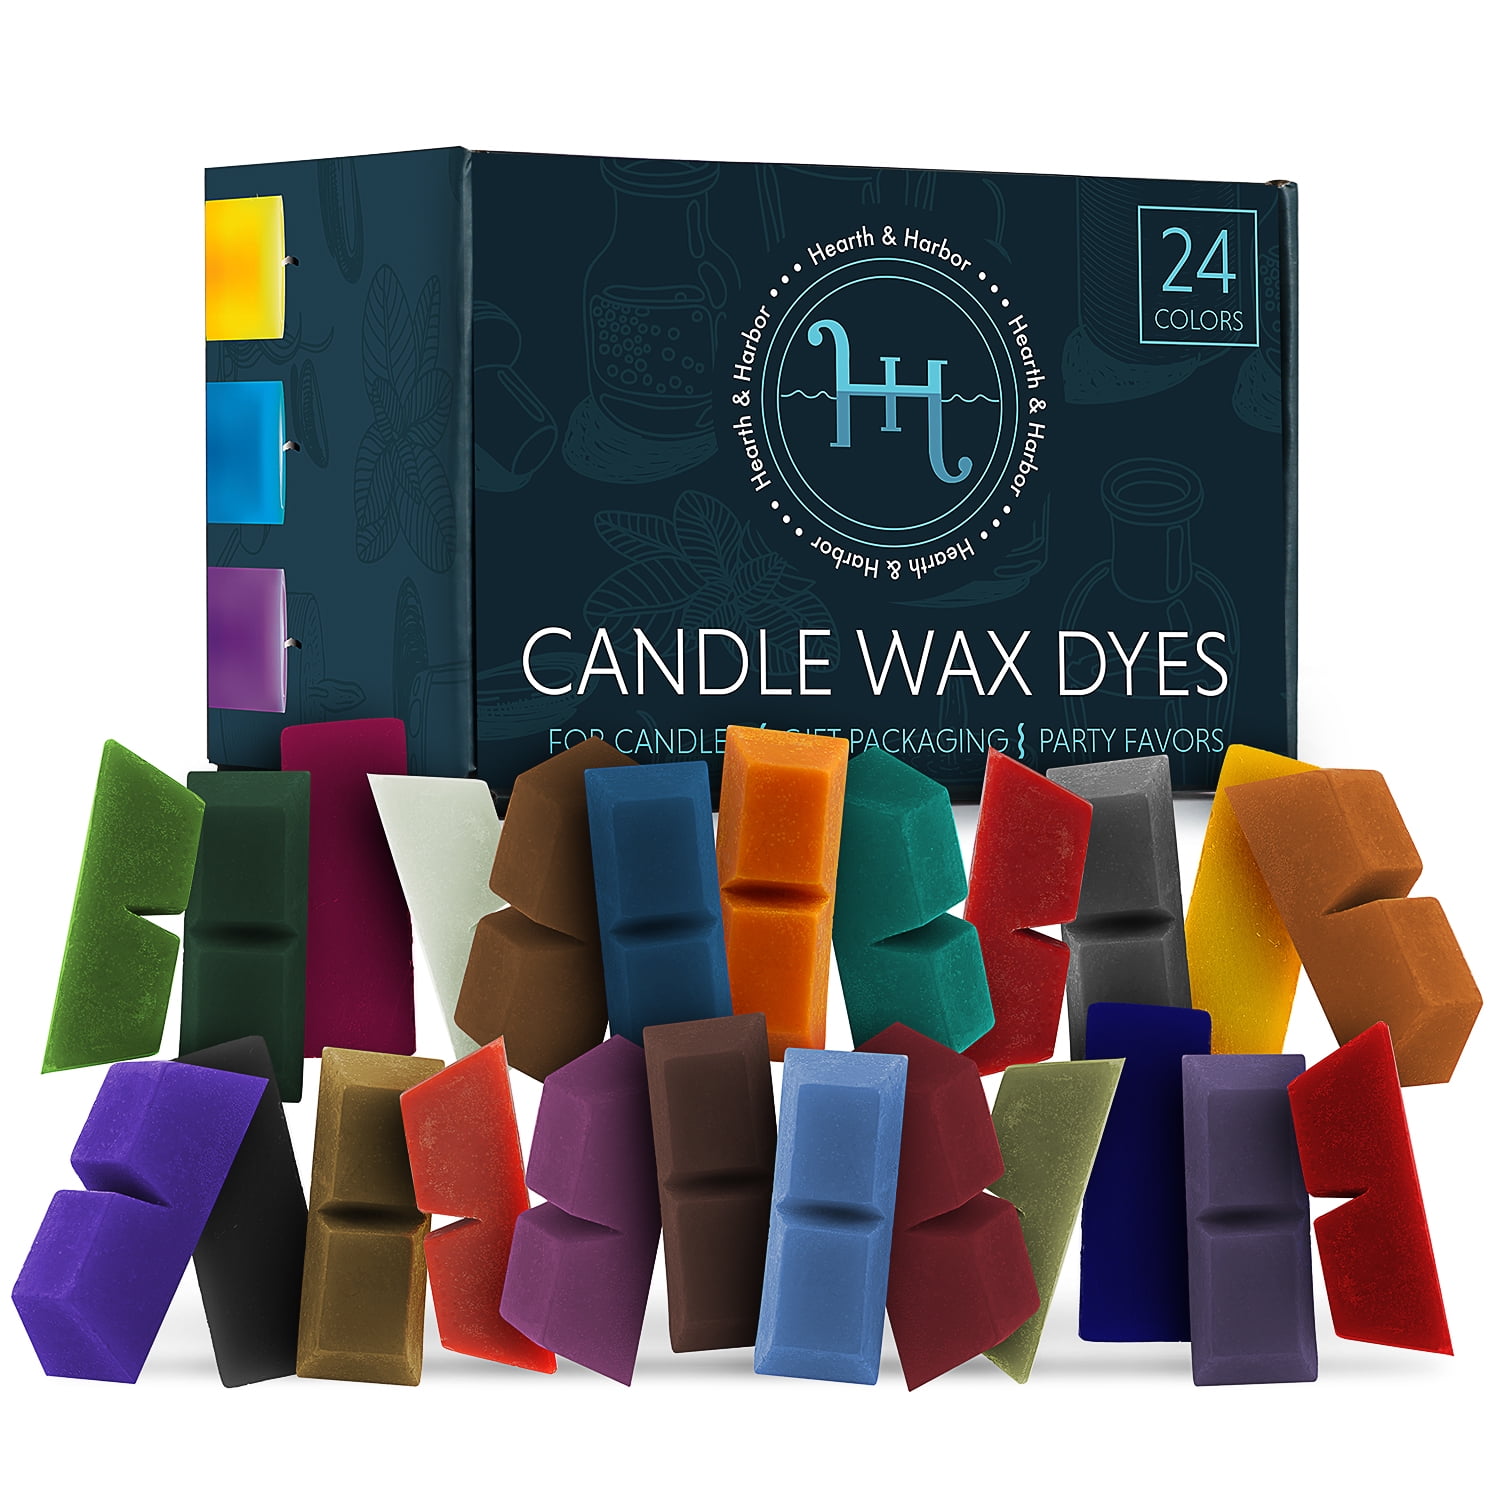  HOMY ARTY Candle Dye - 32 Colors Candle Wax Dye, Highly  Concentrated Candle Color Dye, Oil-Based Liquid Candle Dye for Soy Wax,  Candle Making - 5ml Each